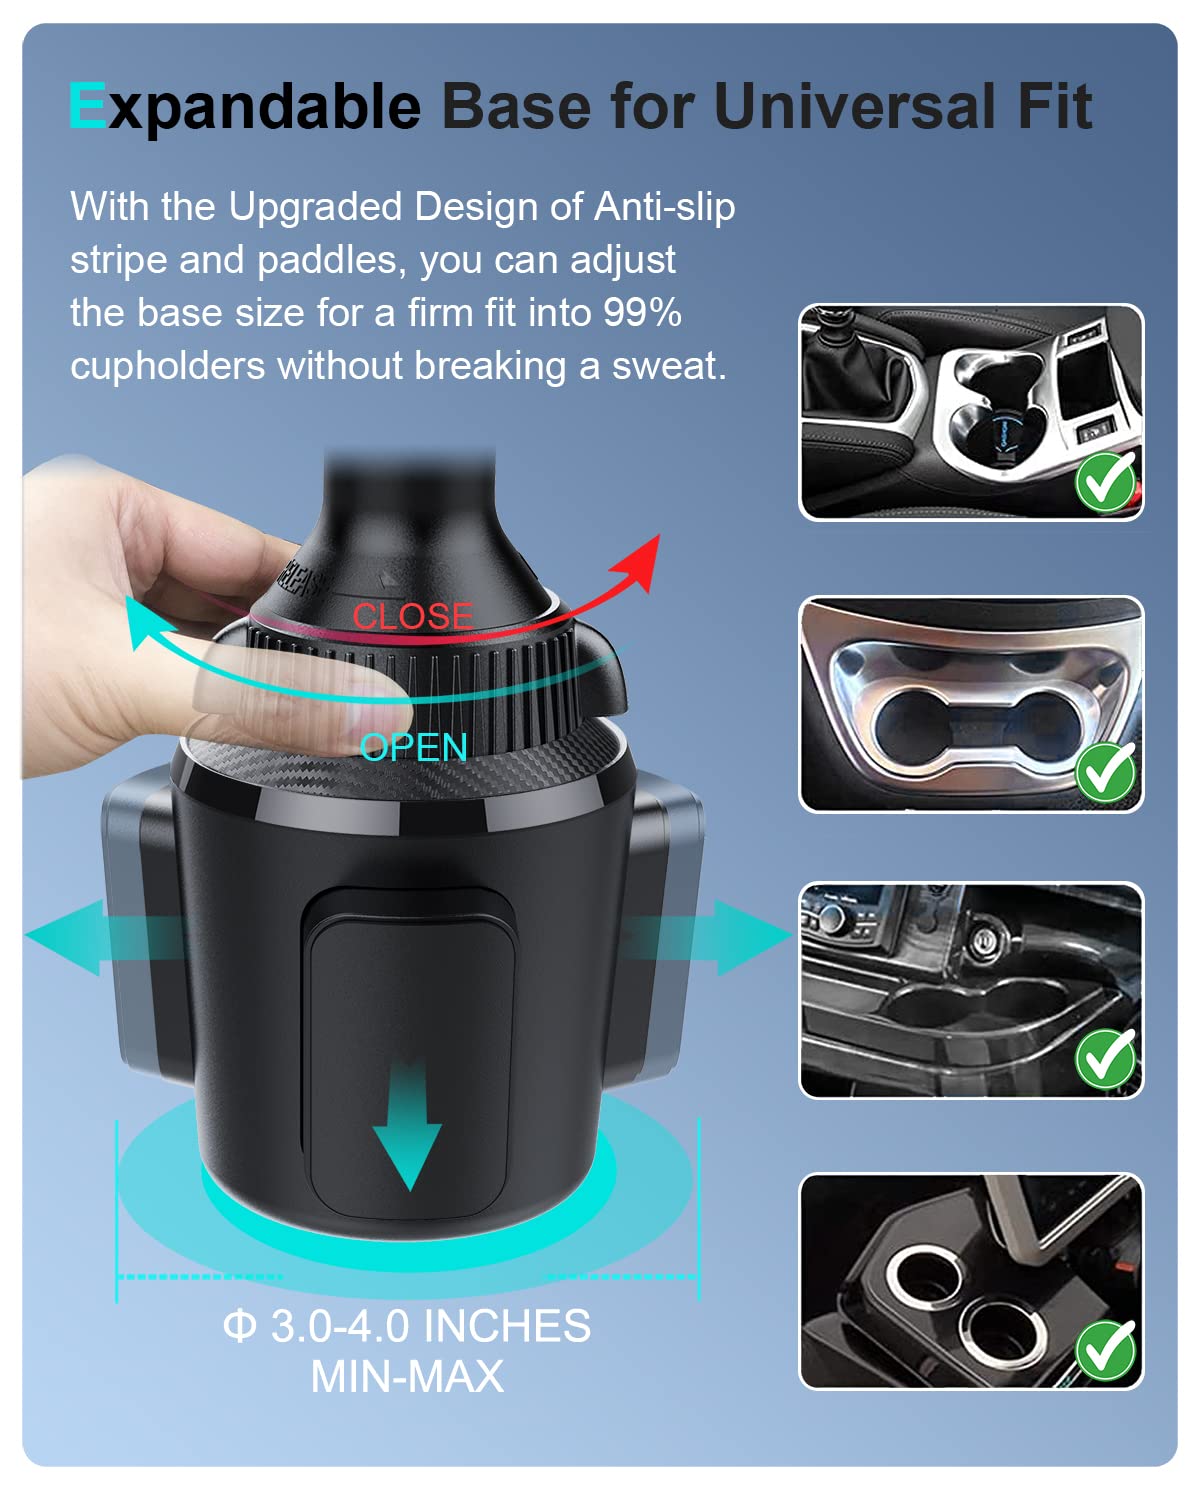 OQTIQ Wireless Car Charger 15W Cup Holder Phone Mount Adjustable Car Phone Holder Charger with QC 3.0 Adapter Compatible with iPhone 14/13/12 Pro Max, Samsung, Pixel, LG & More